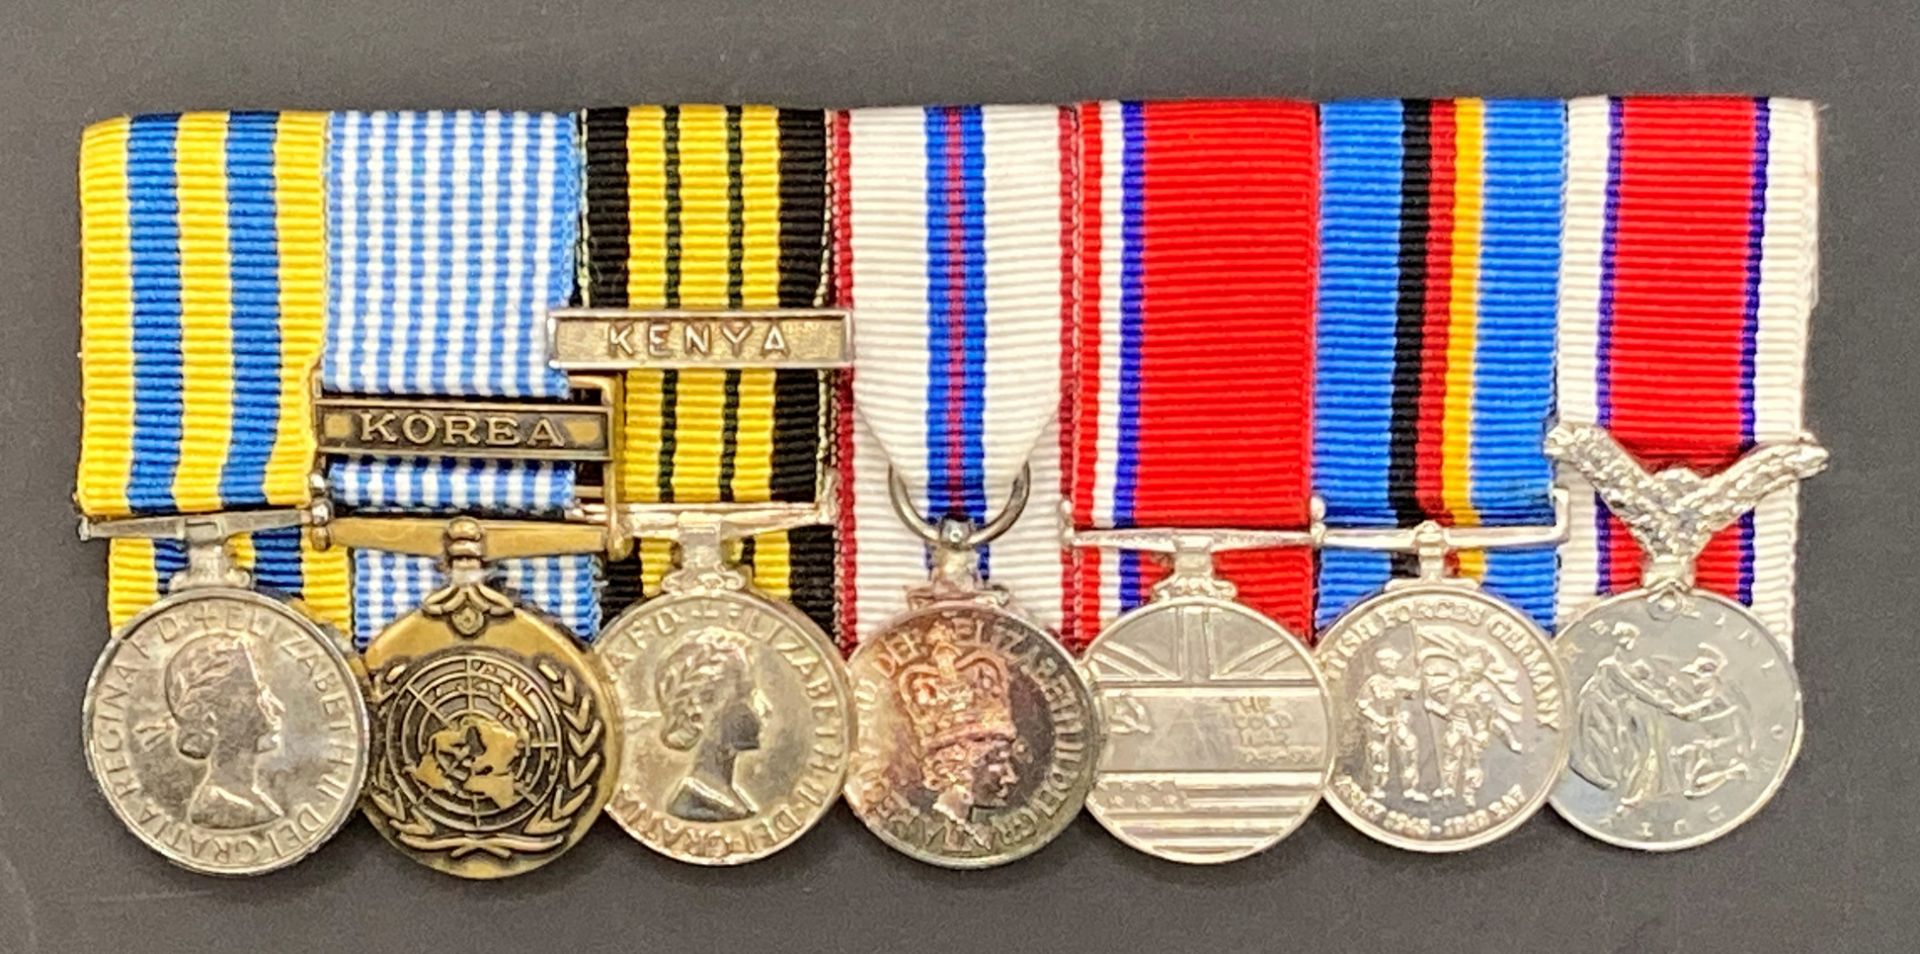 Africa General Service Medal (Queen Elizabeth II) complete with ribbon and clasp for Kenya and a - Image 4 of 4